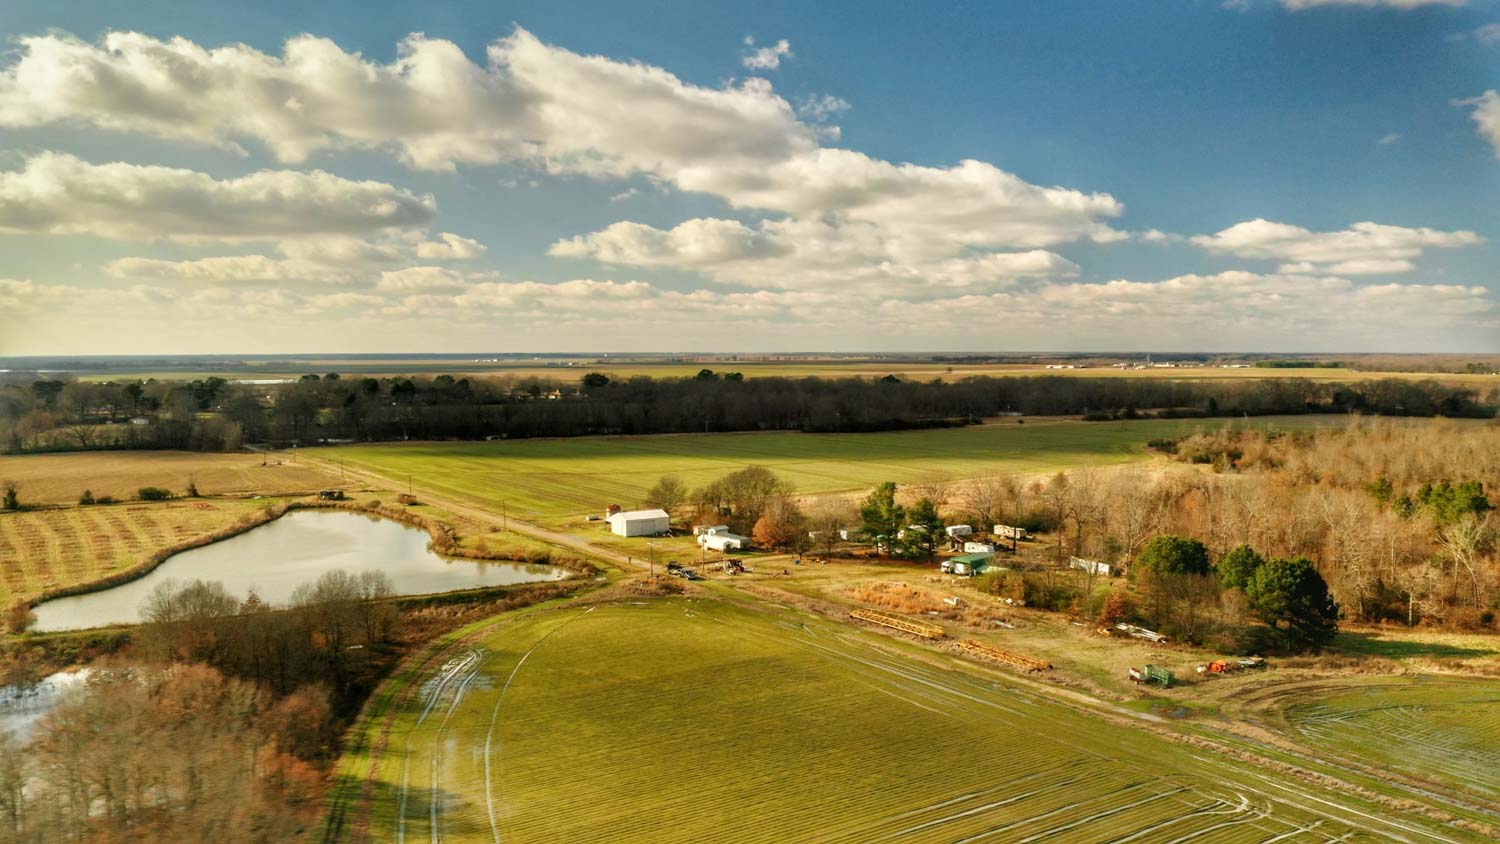 Wellons Land Active Listings The Lawson-Trotter Farm 1